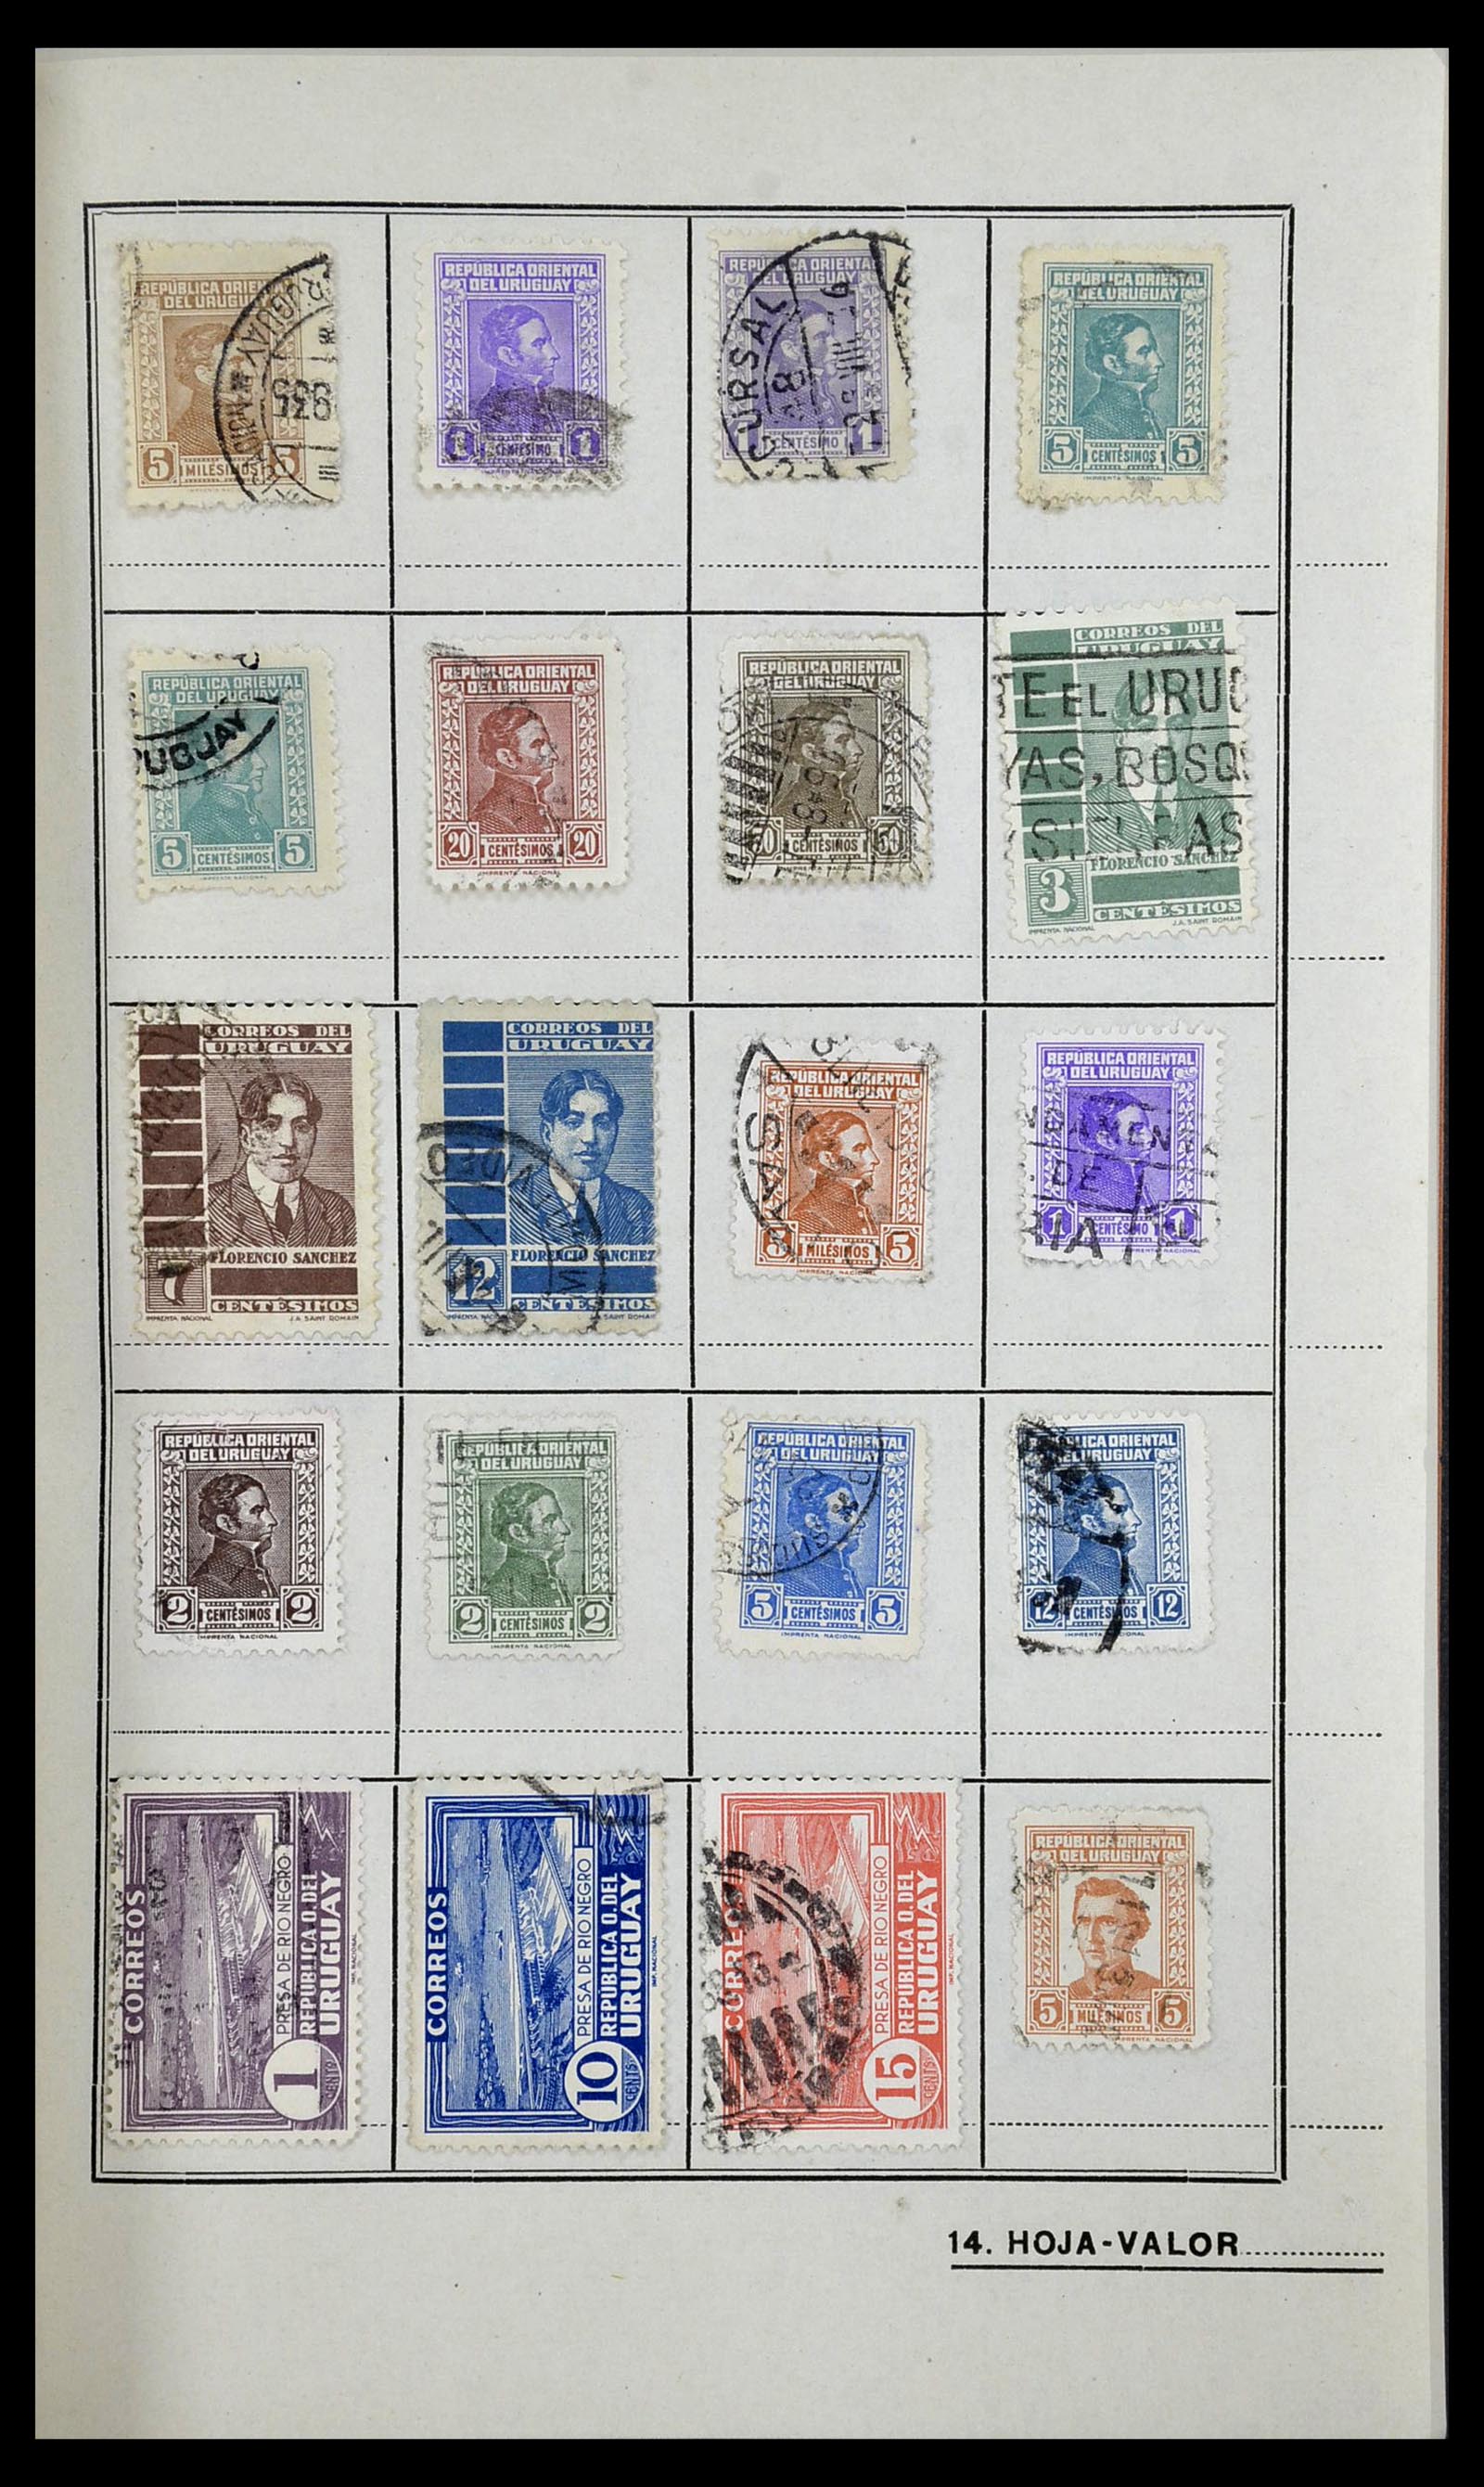 34115 019 - Stamp collection 34115 Uruguay 1856-1950.